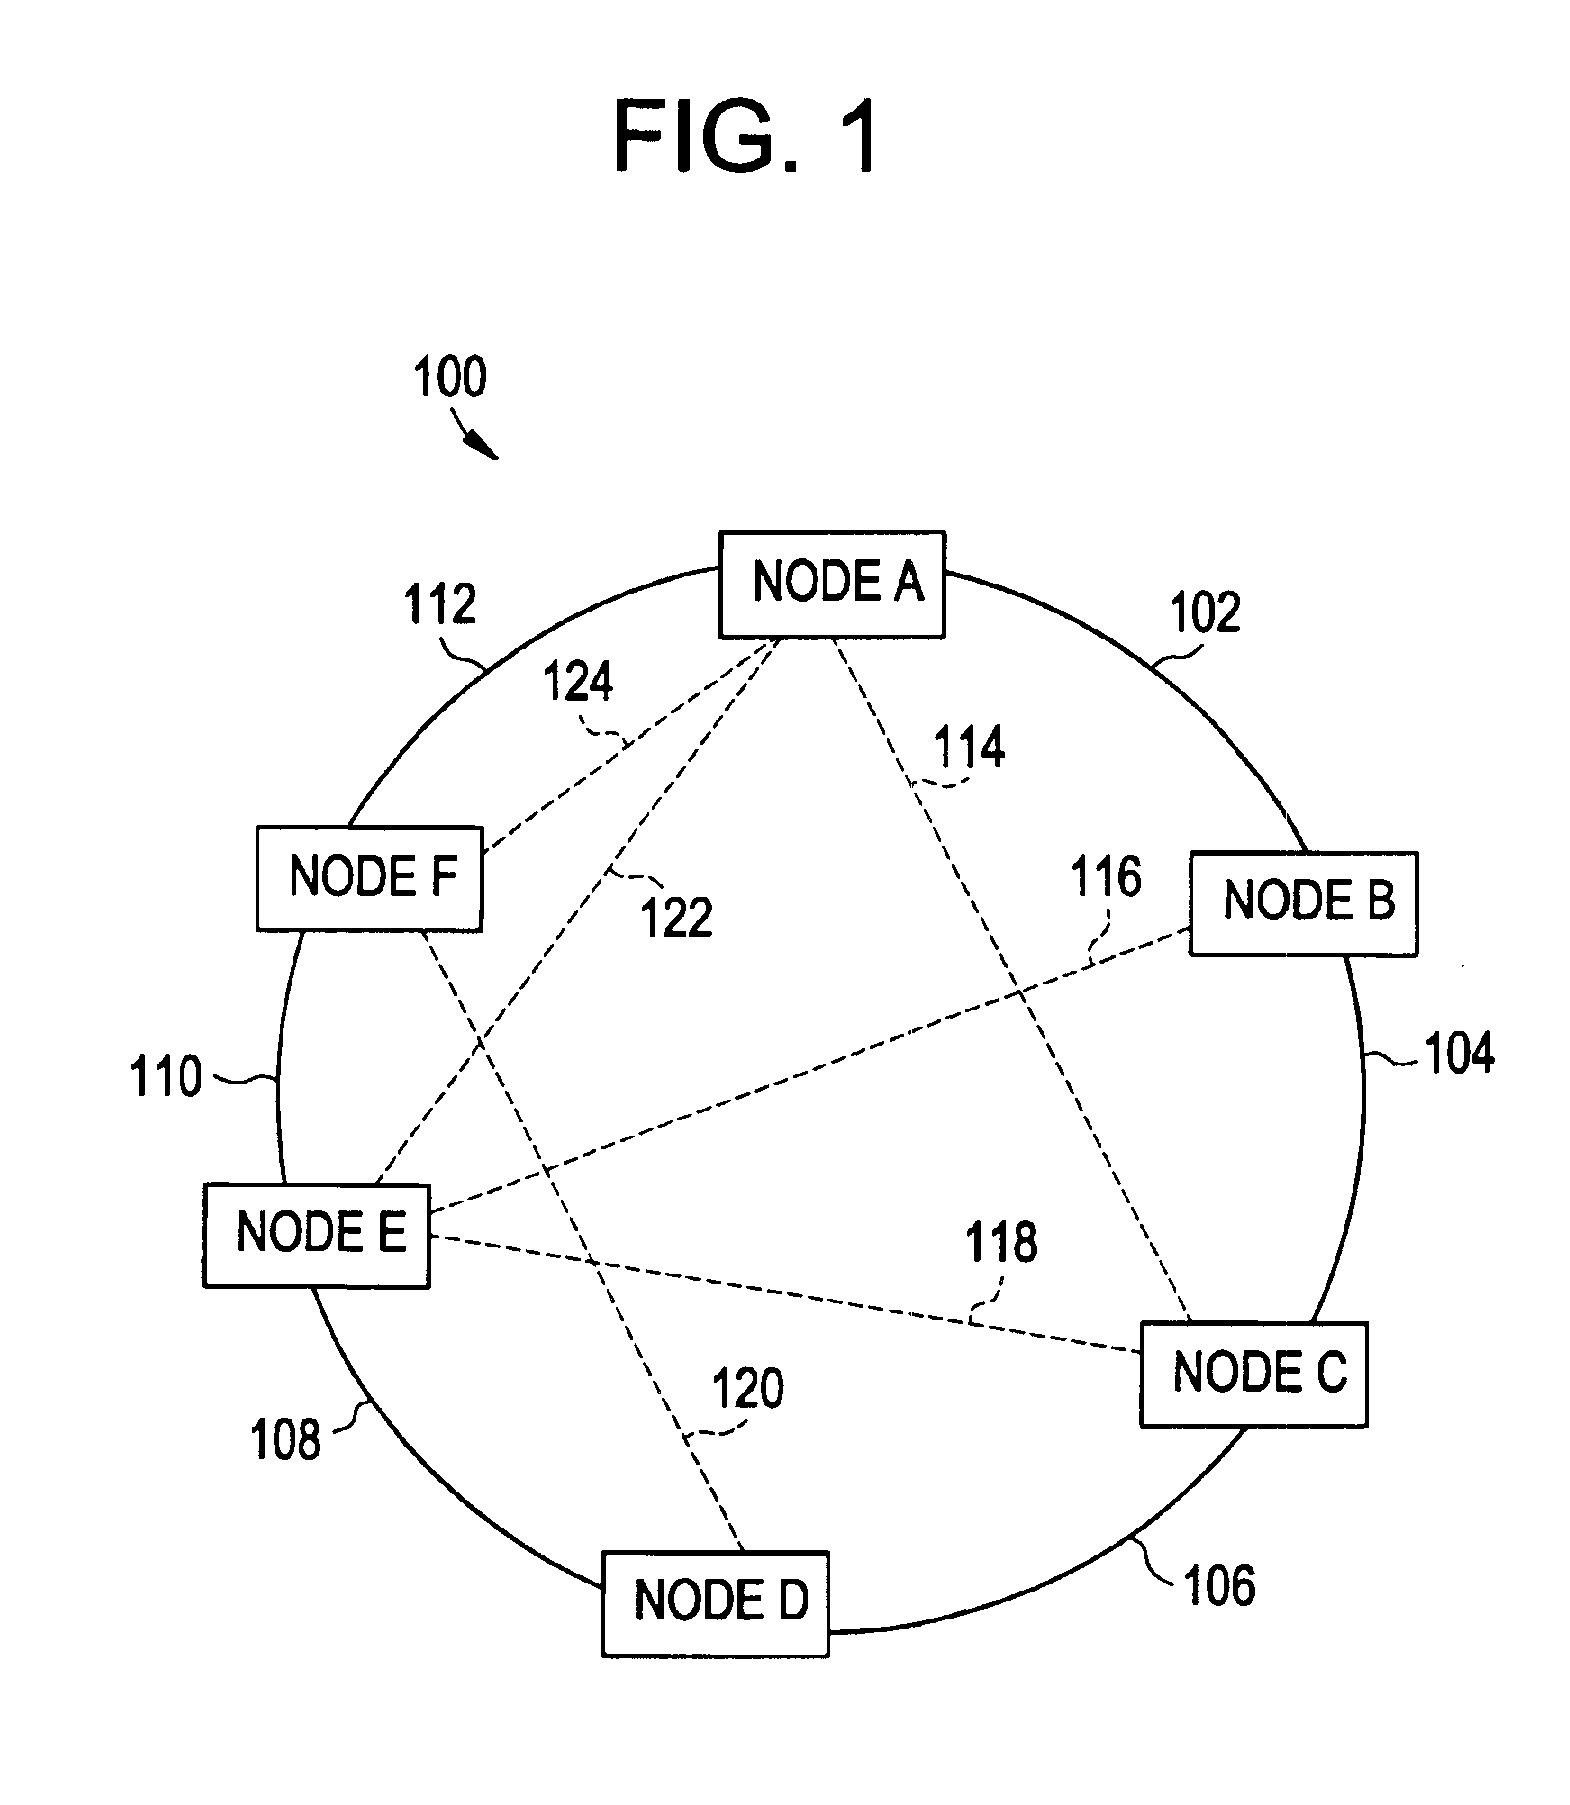 Apparatus and method for synchronous and asynchronous transfer mode switching of ATM traffic